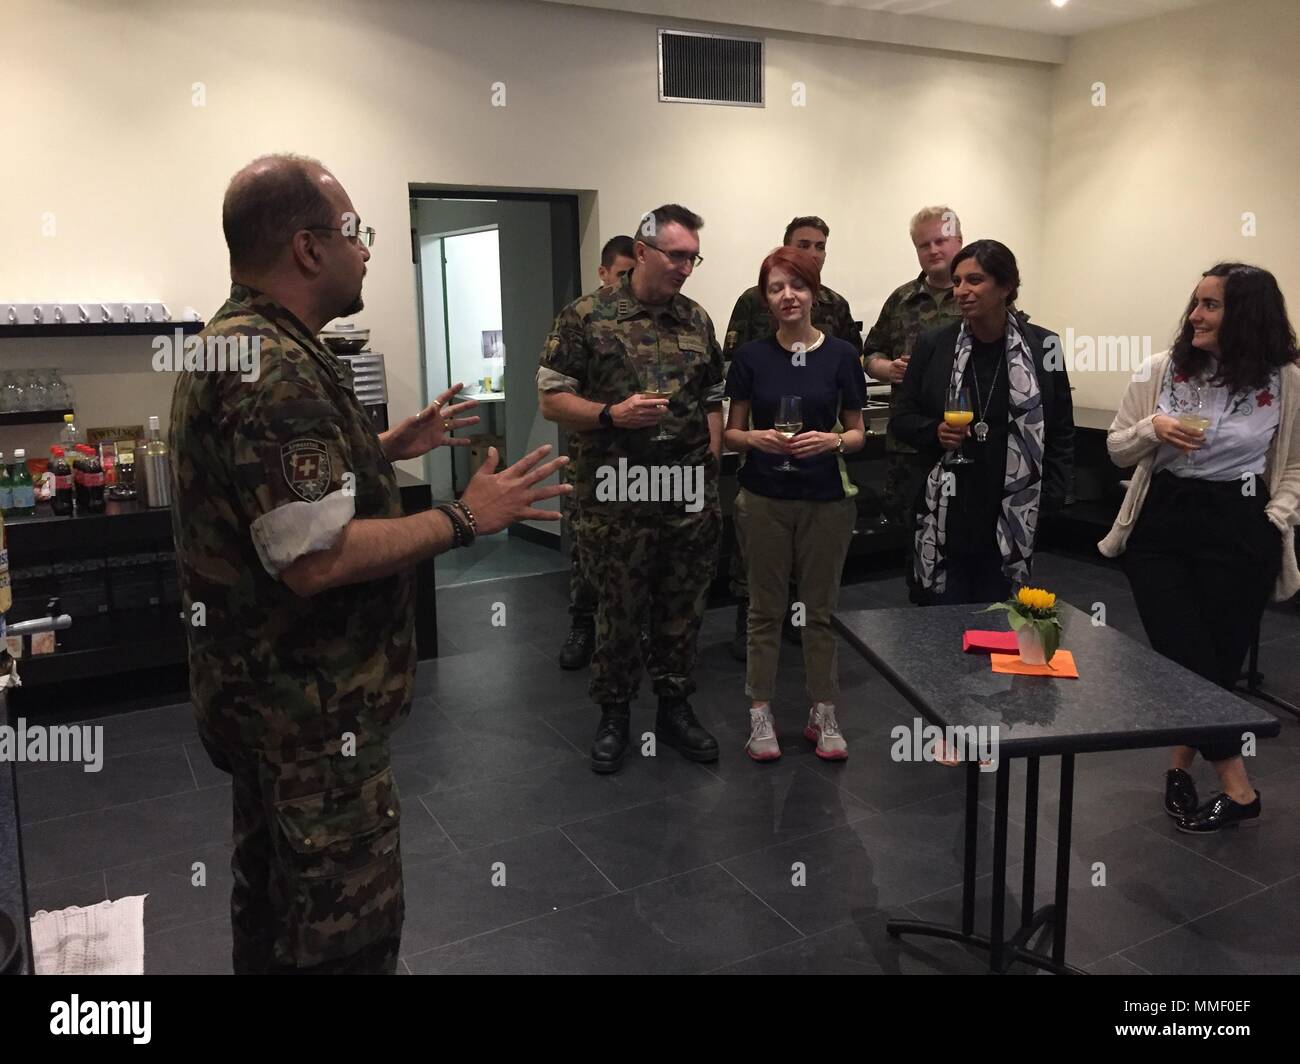 Colonel Prasenjit Choudhury of the Swiss Army gives introductory remarks to a group of military and civilian personnel from Organization for Security Cooperation in Europe member states attending the Swiss Ammunition Site Assessment Course in Thun, Switzerland, September 25, 2017. Stock Photo